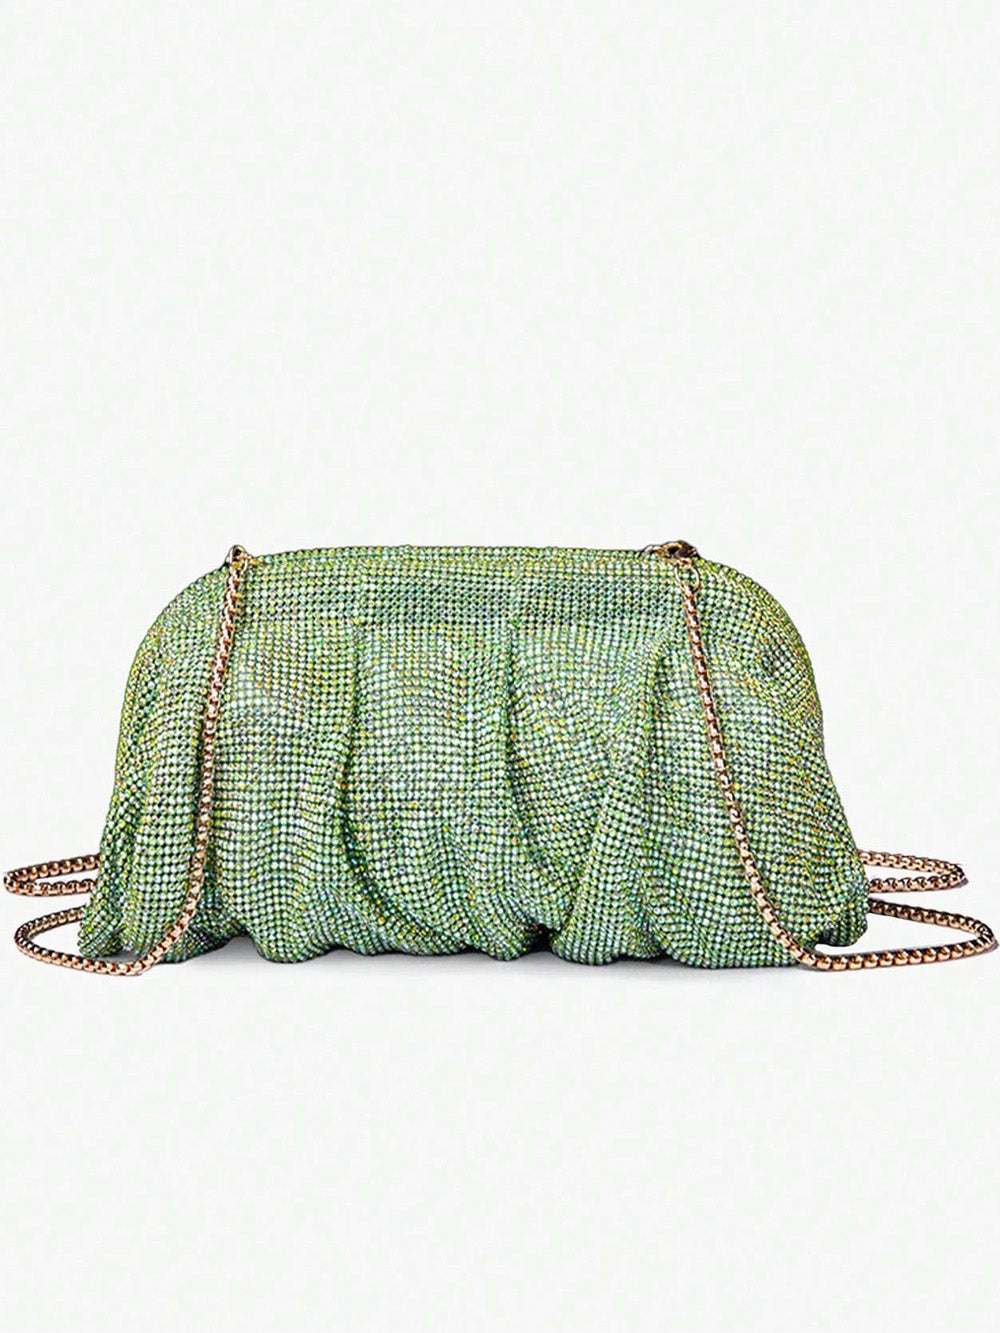 Soft pleated crystal clutch in green